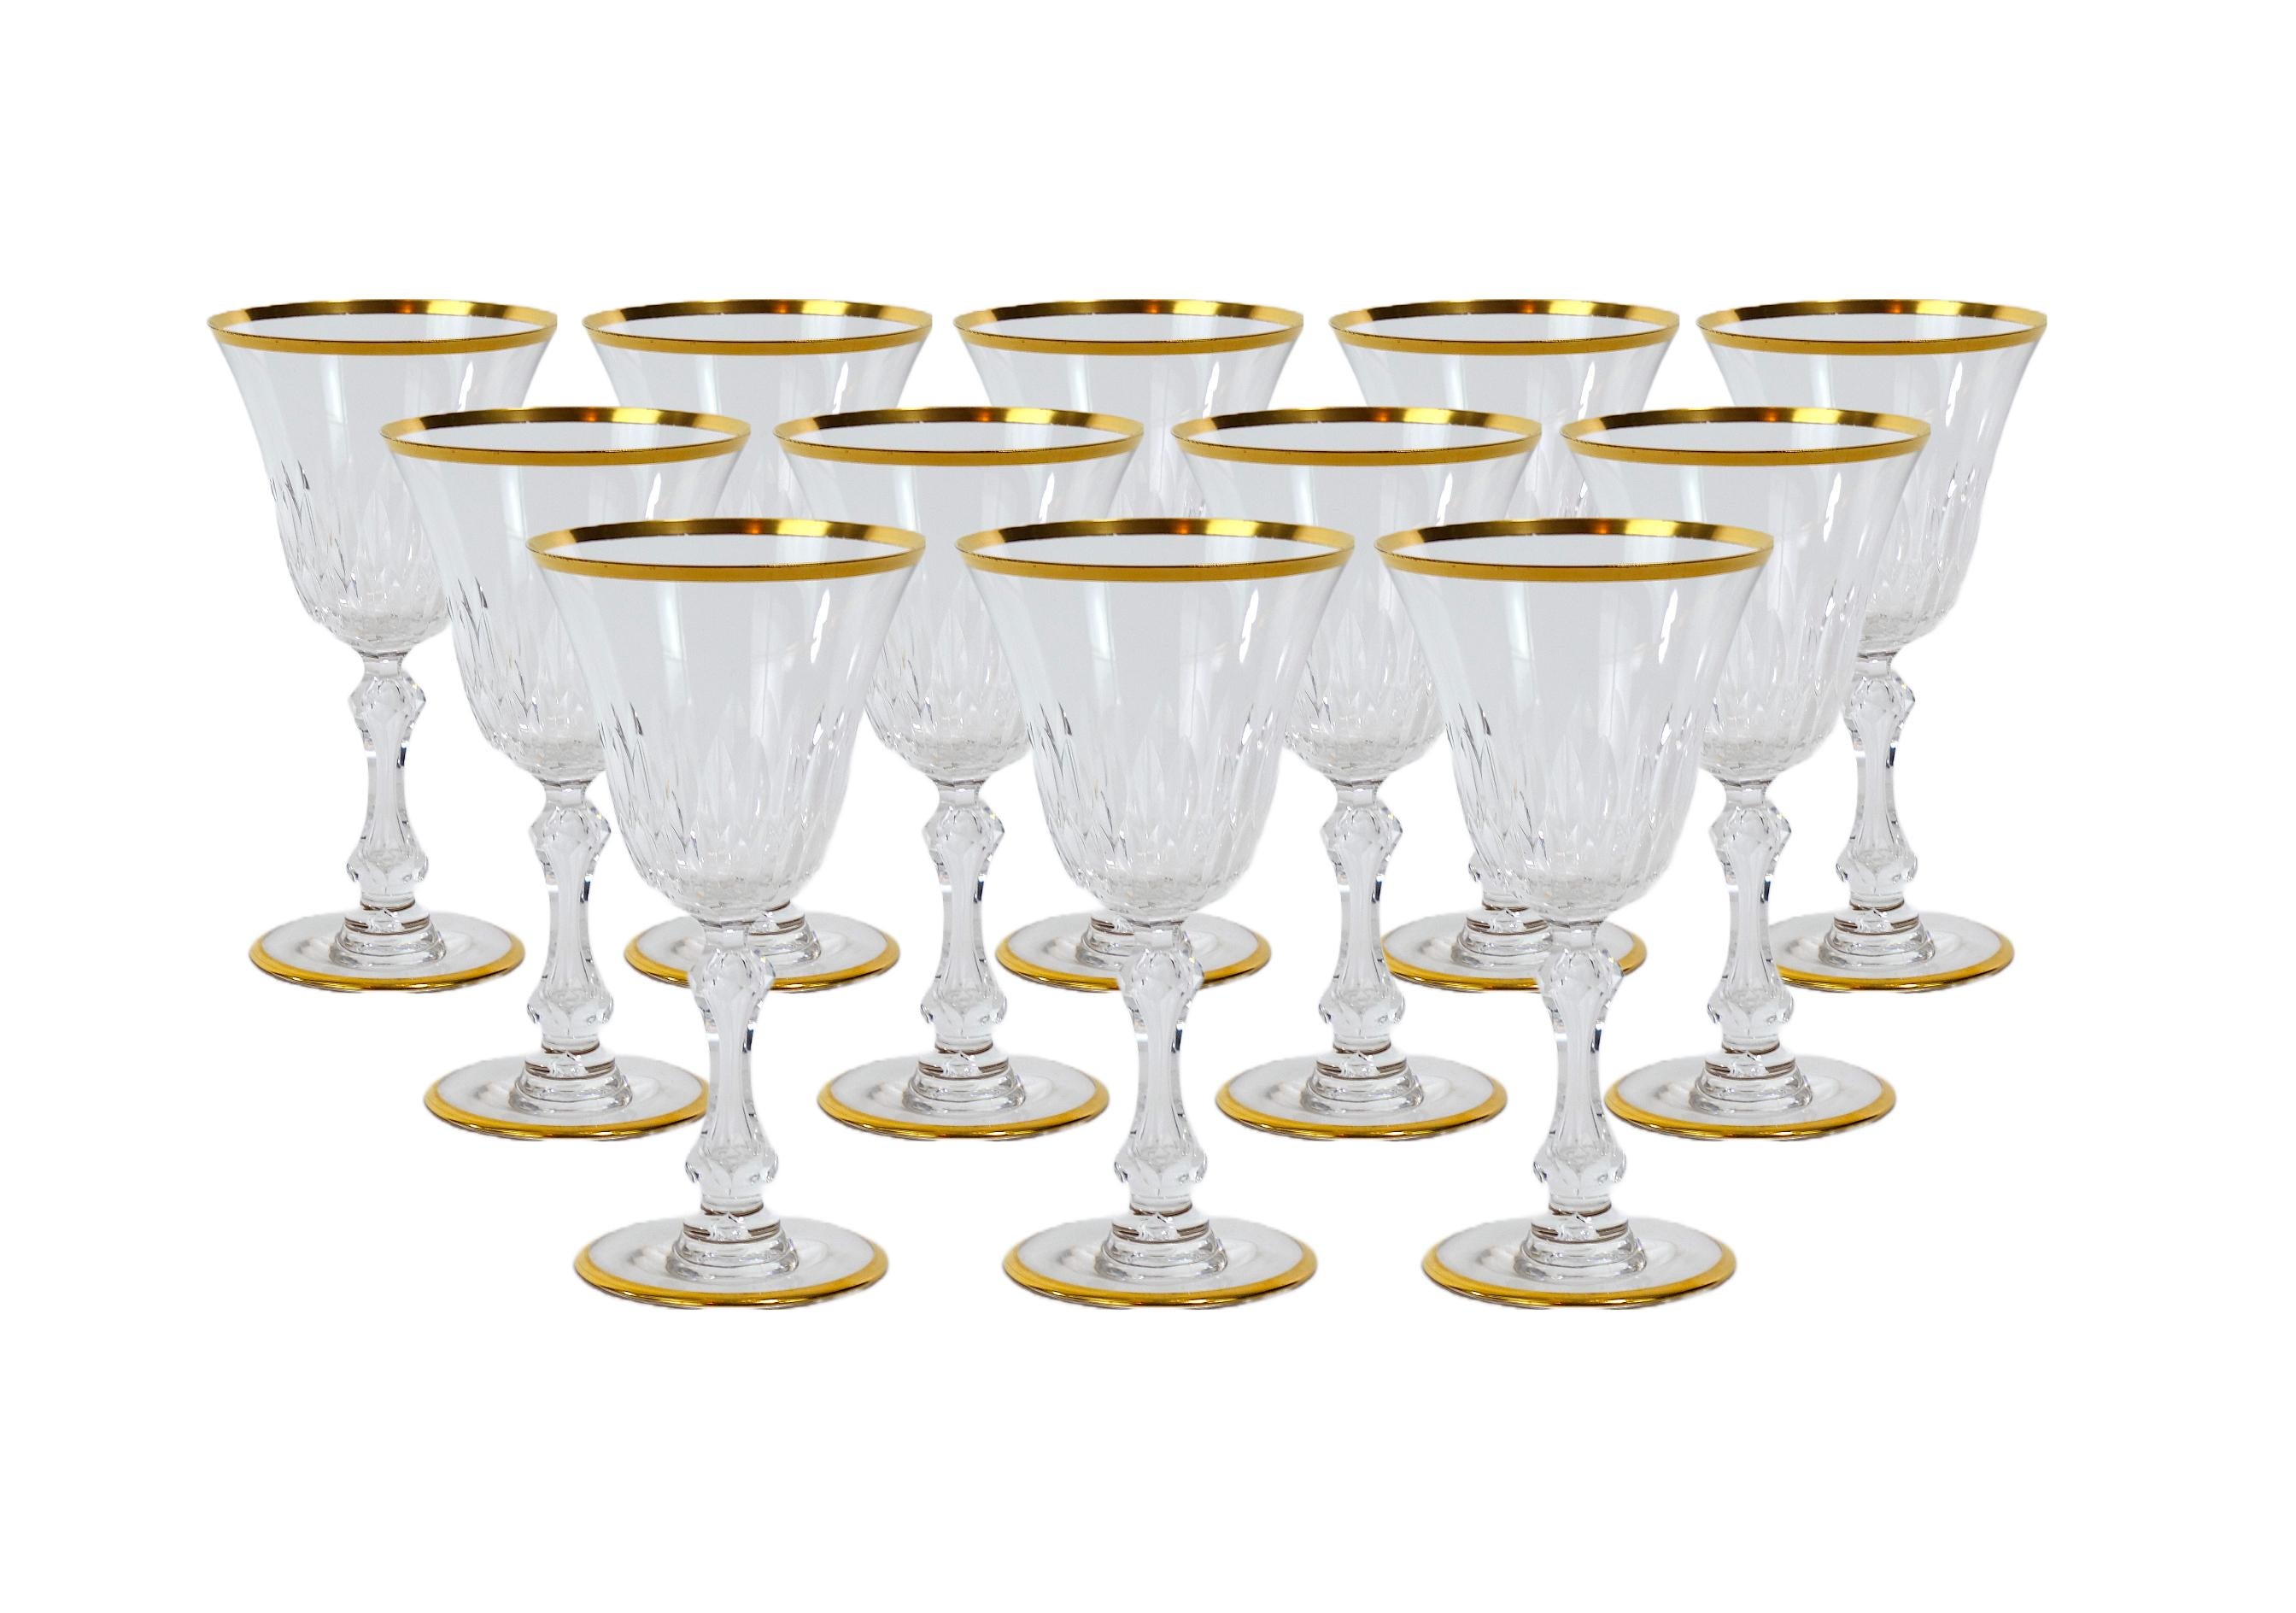 Richly hand cut and mouth blown with hand gilt gold trim top / base barware and tableware glassware service for 12 people. Each glass features a deep cuts that allow the light to retract and shine to a brilliant finish from any angle. Mouth blown